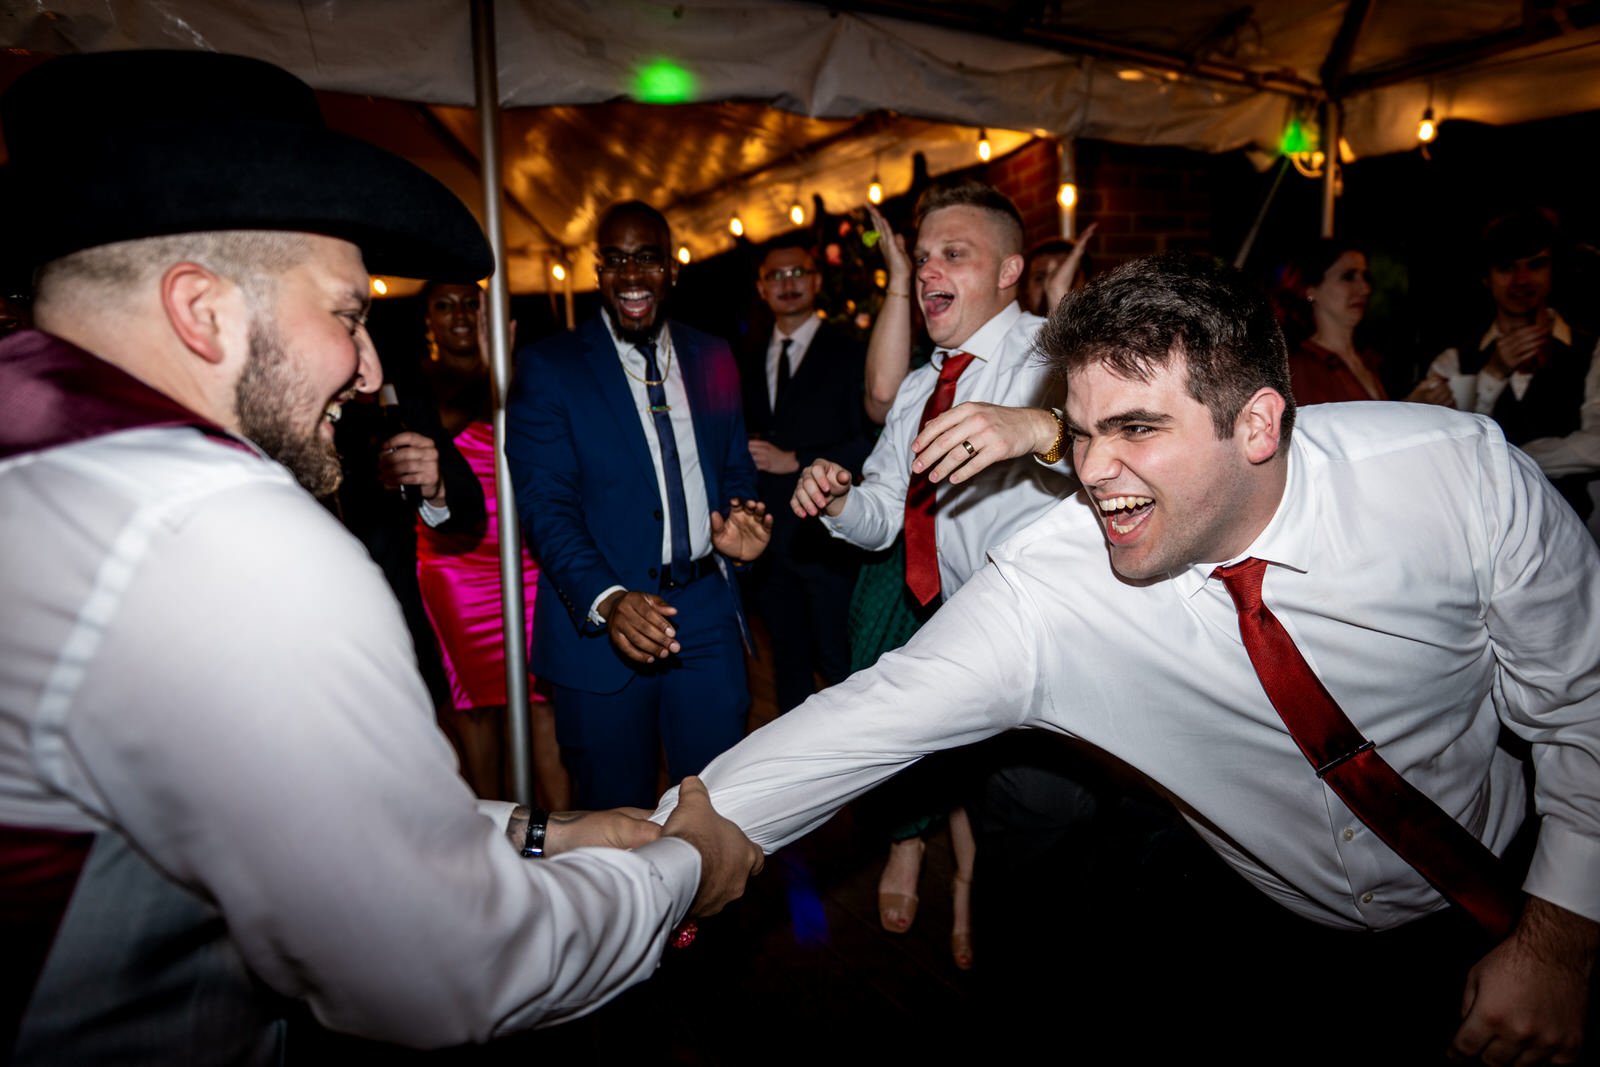 Ampersea_Baltimore_Maryland_Wedding_Suzanne&Andrew_Dance_Party-4380.jpg